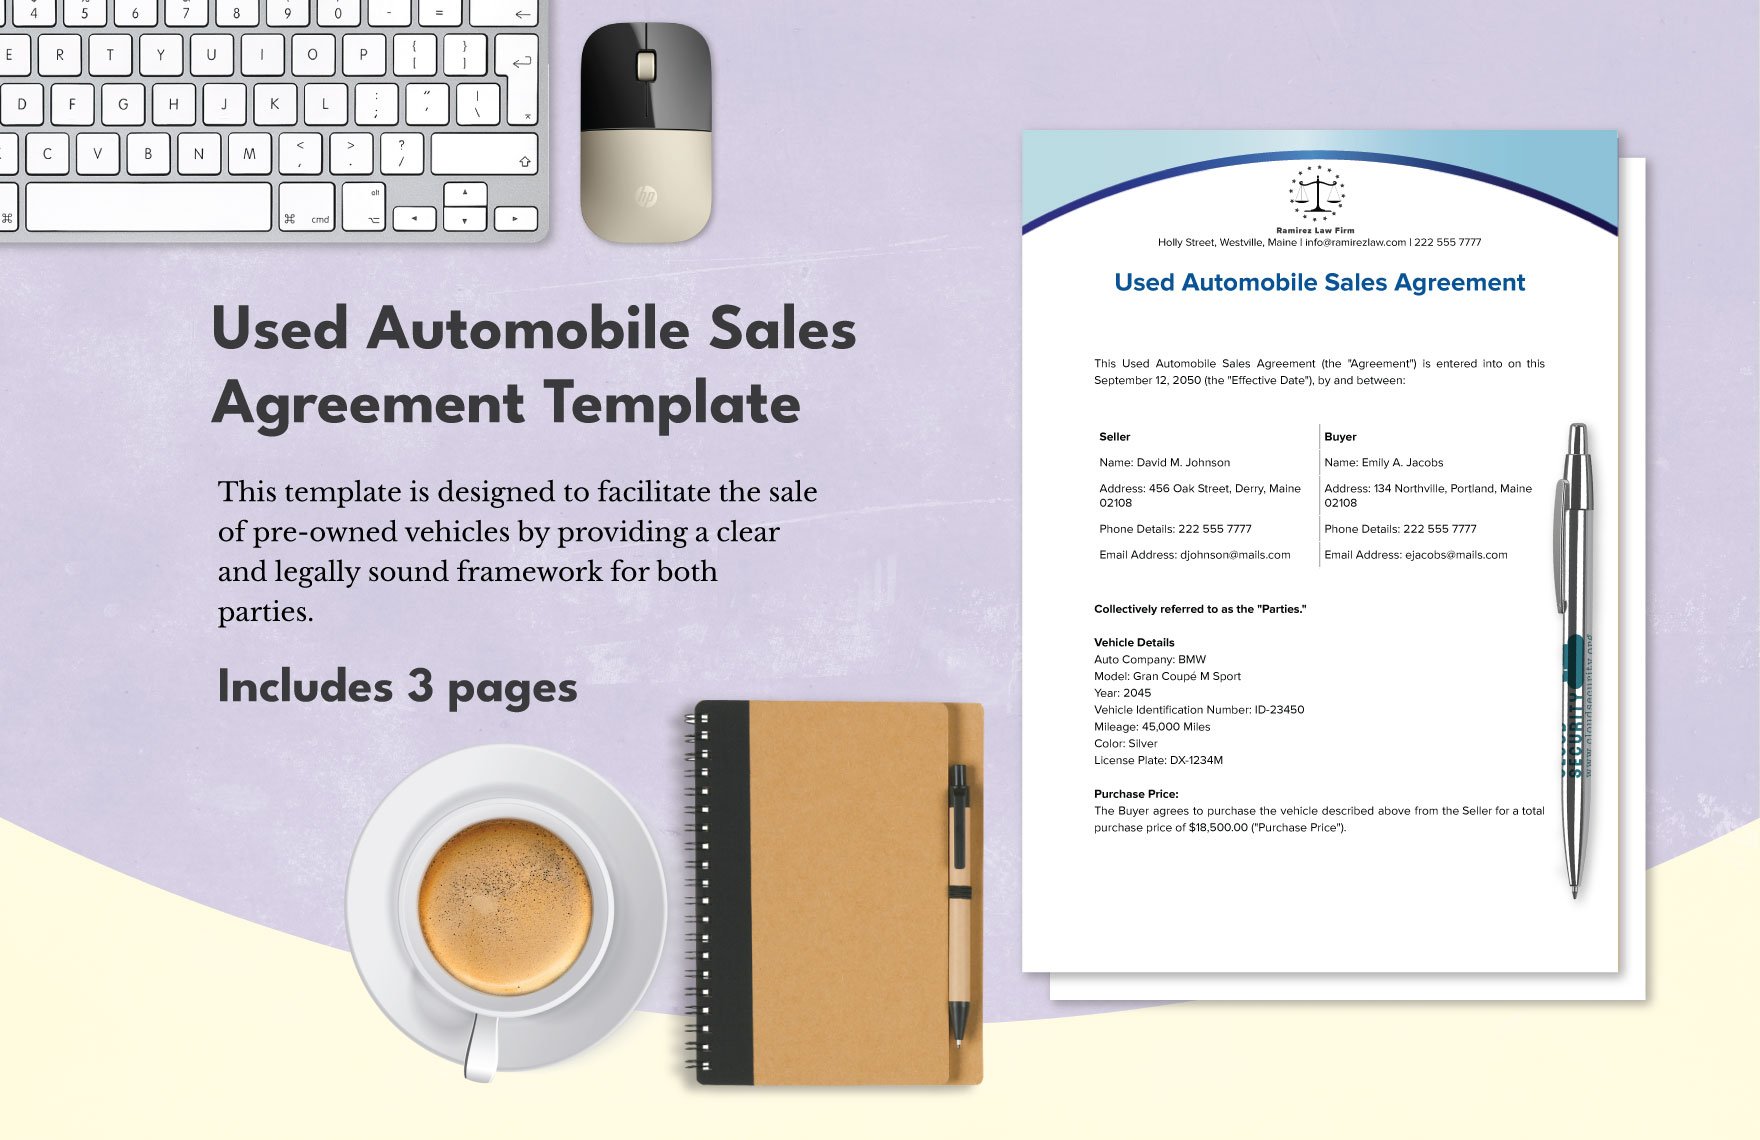 Used Automobile Sales Agreement Template